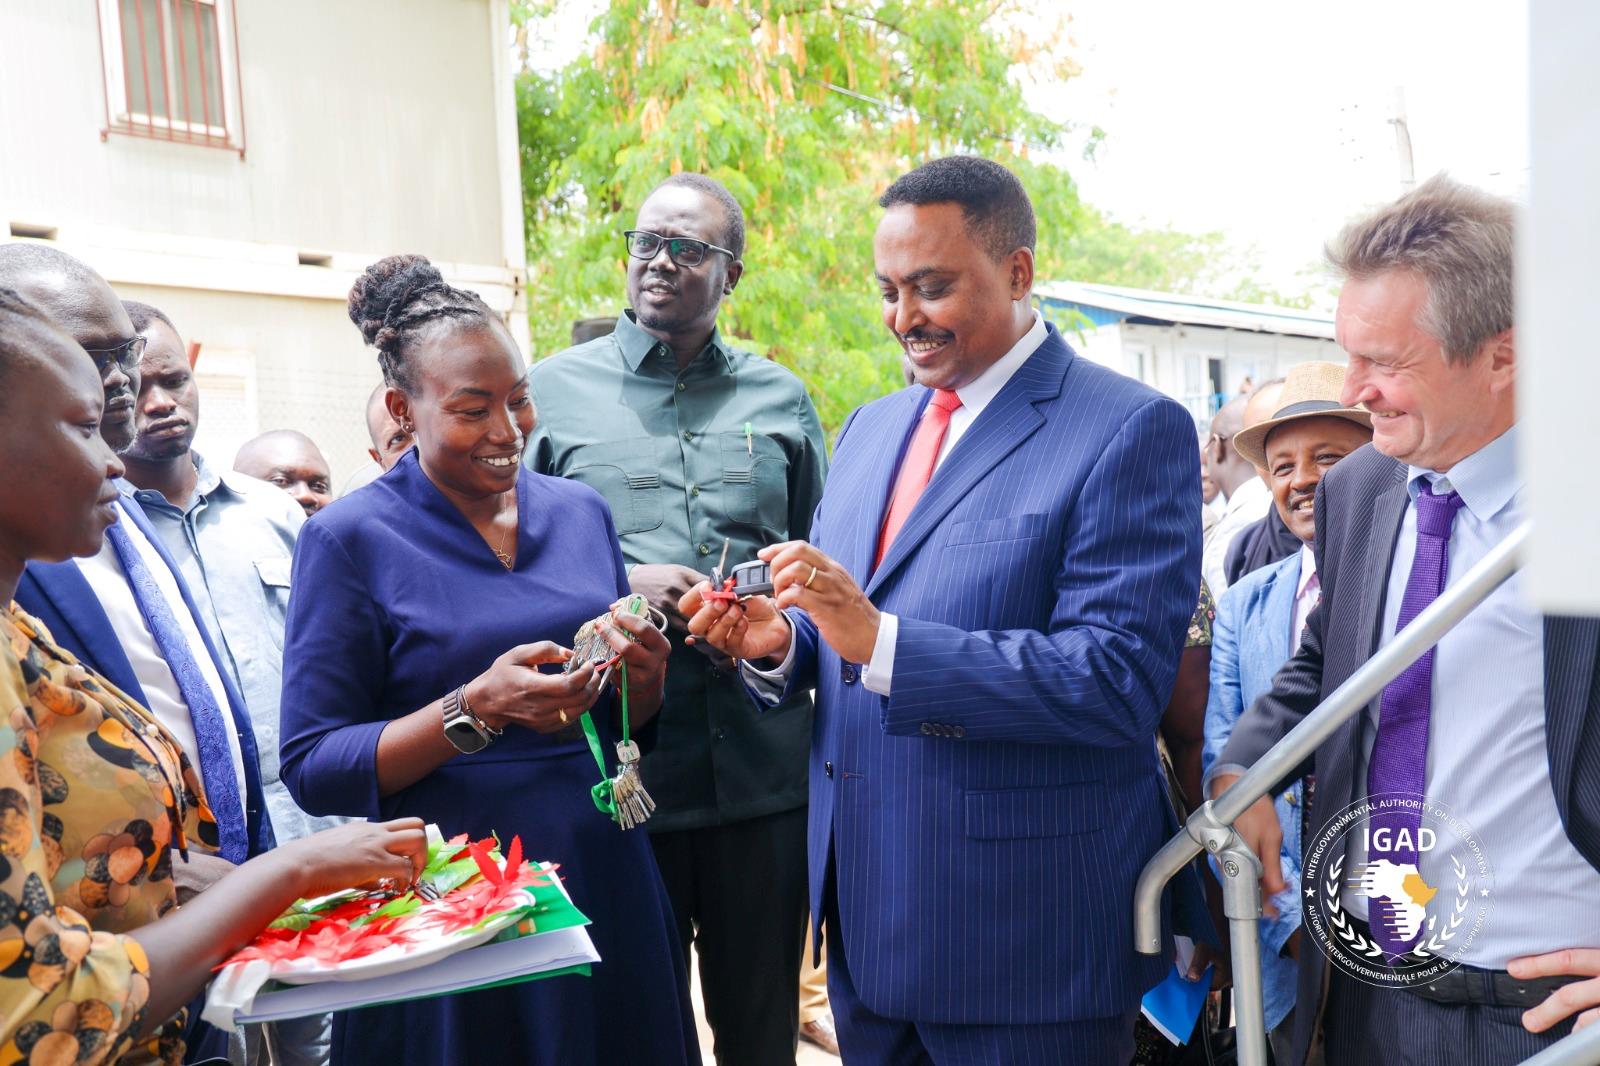 IGAD hands over mobile health facilities to South Sudan